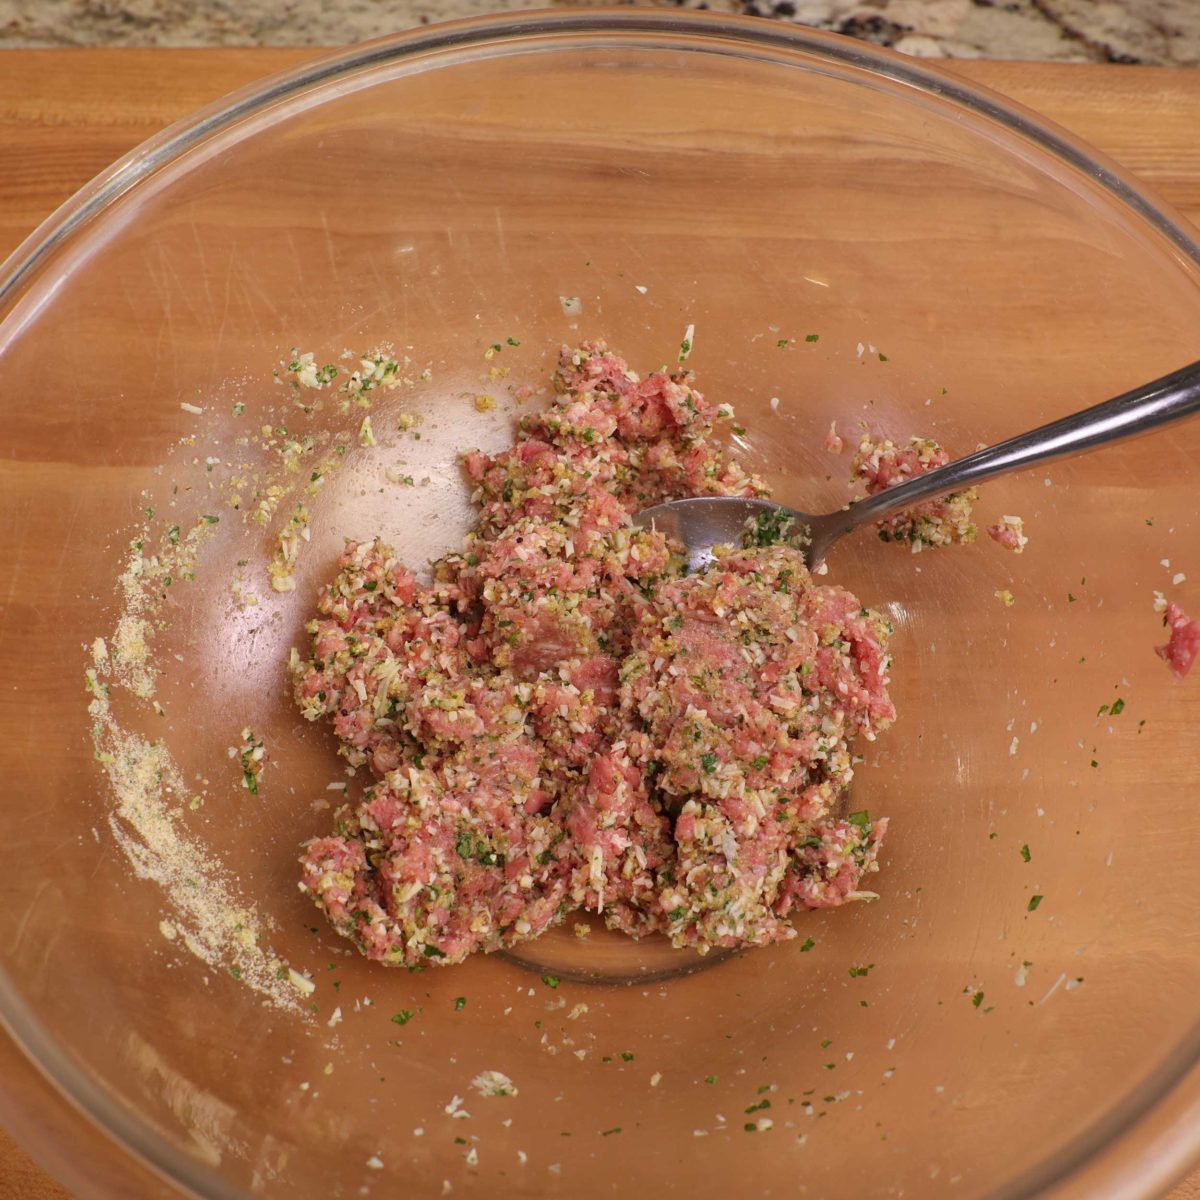 ground beef and other ingredients in meatballs in a large clear mixing bowl.